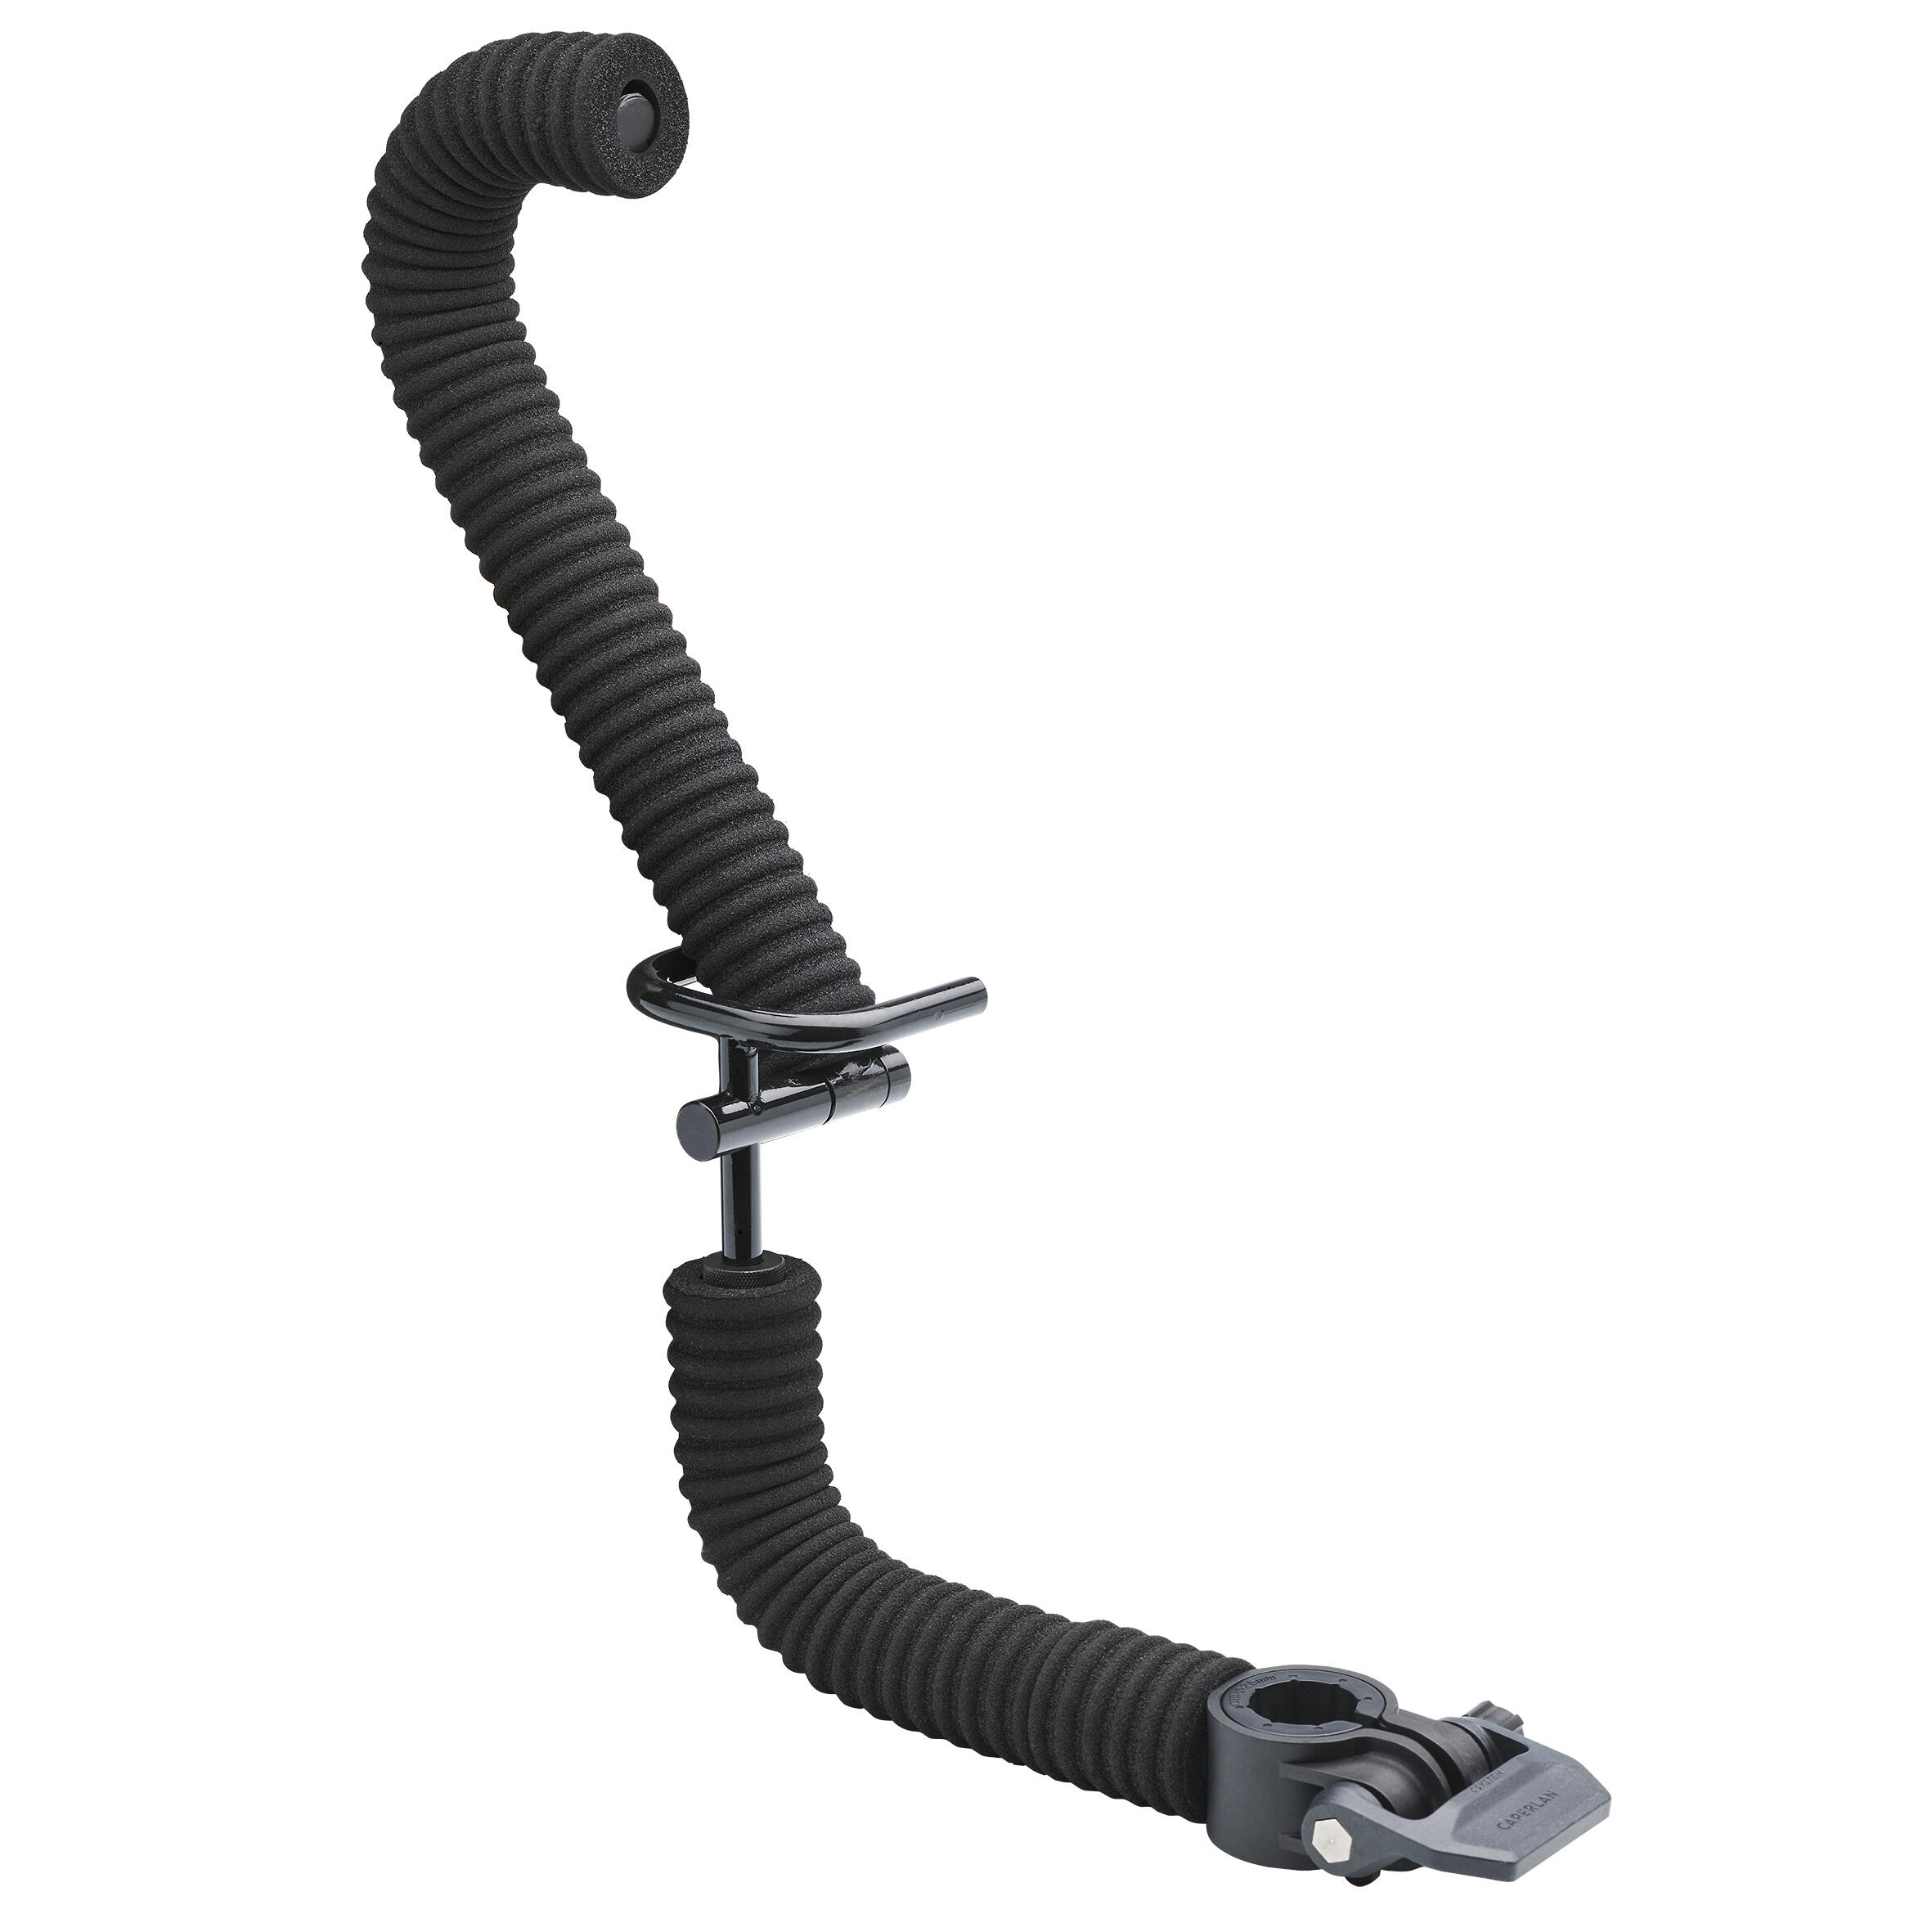 INNOVATIVE REAR ROD REST FOR CSB BPS D25 D36 FISHING STATIONS 2/5